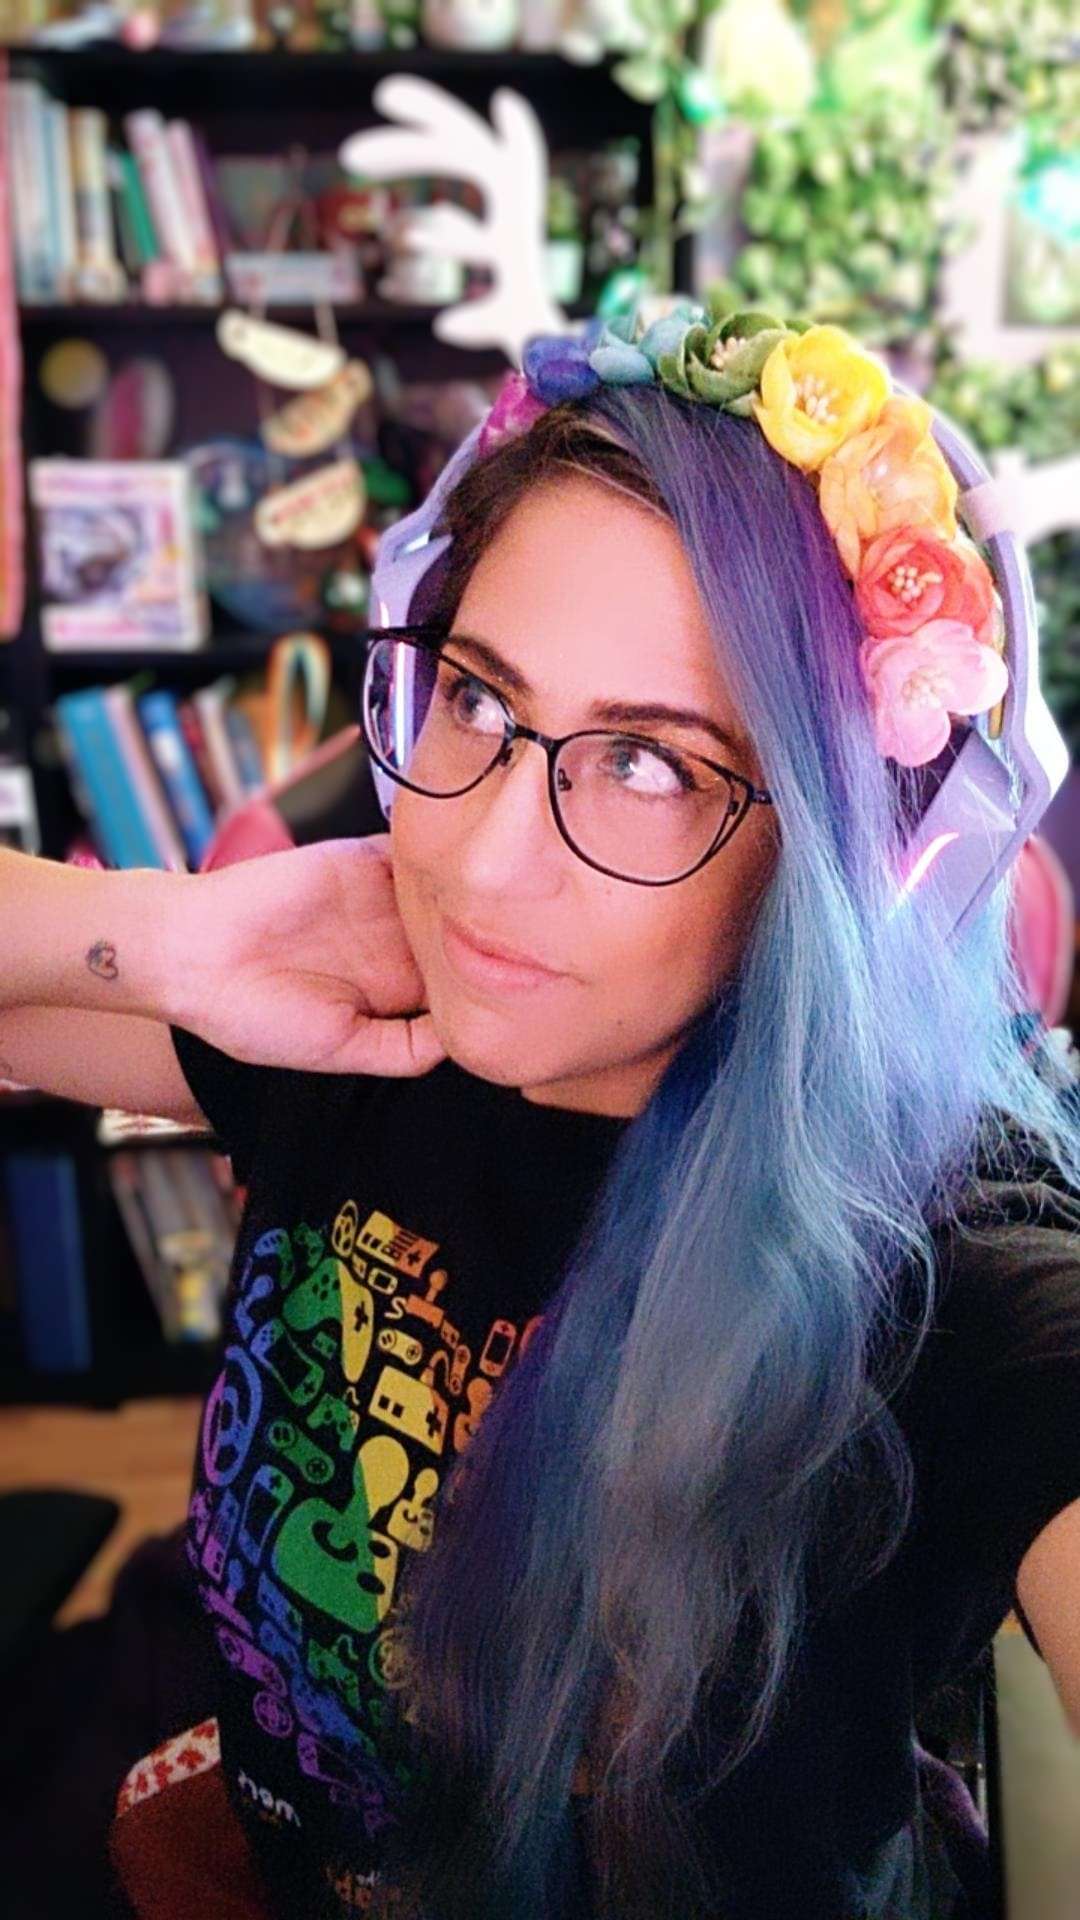 Person wearing glasses, wearing a shirt that has multiple video-game type controllers on it, wearing a rainbow flower crown